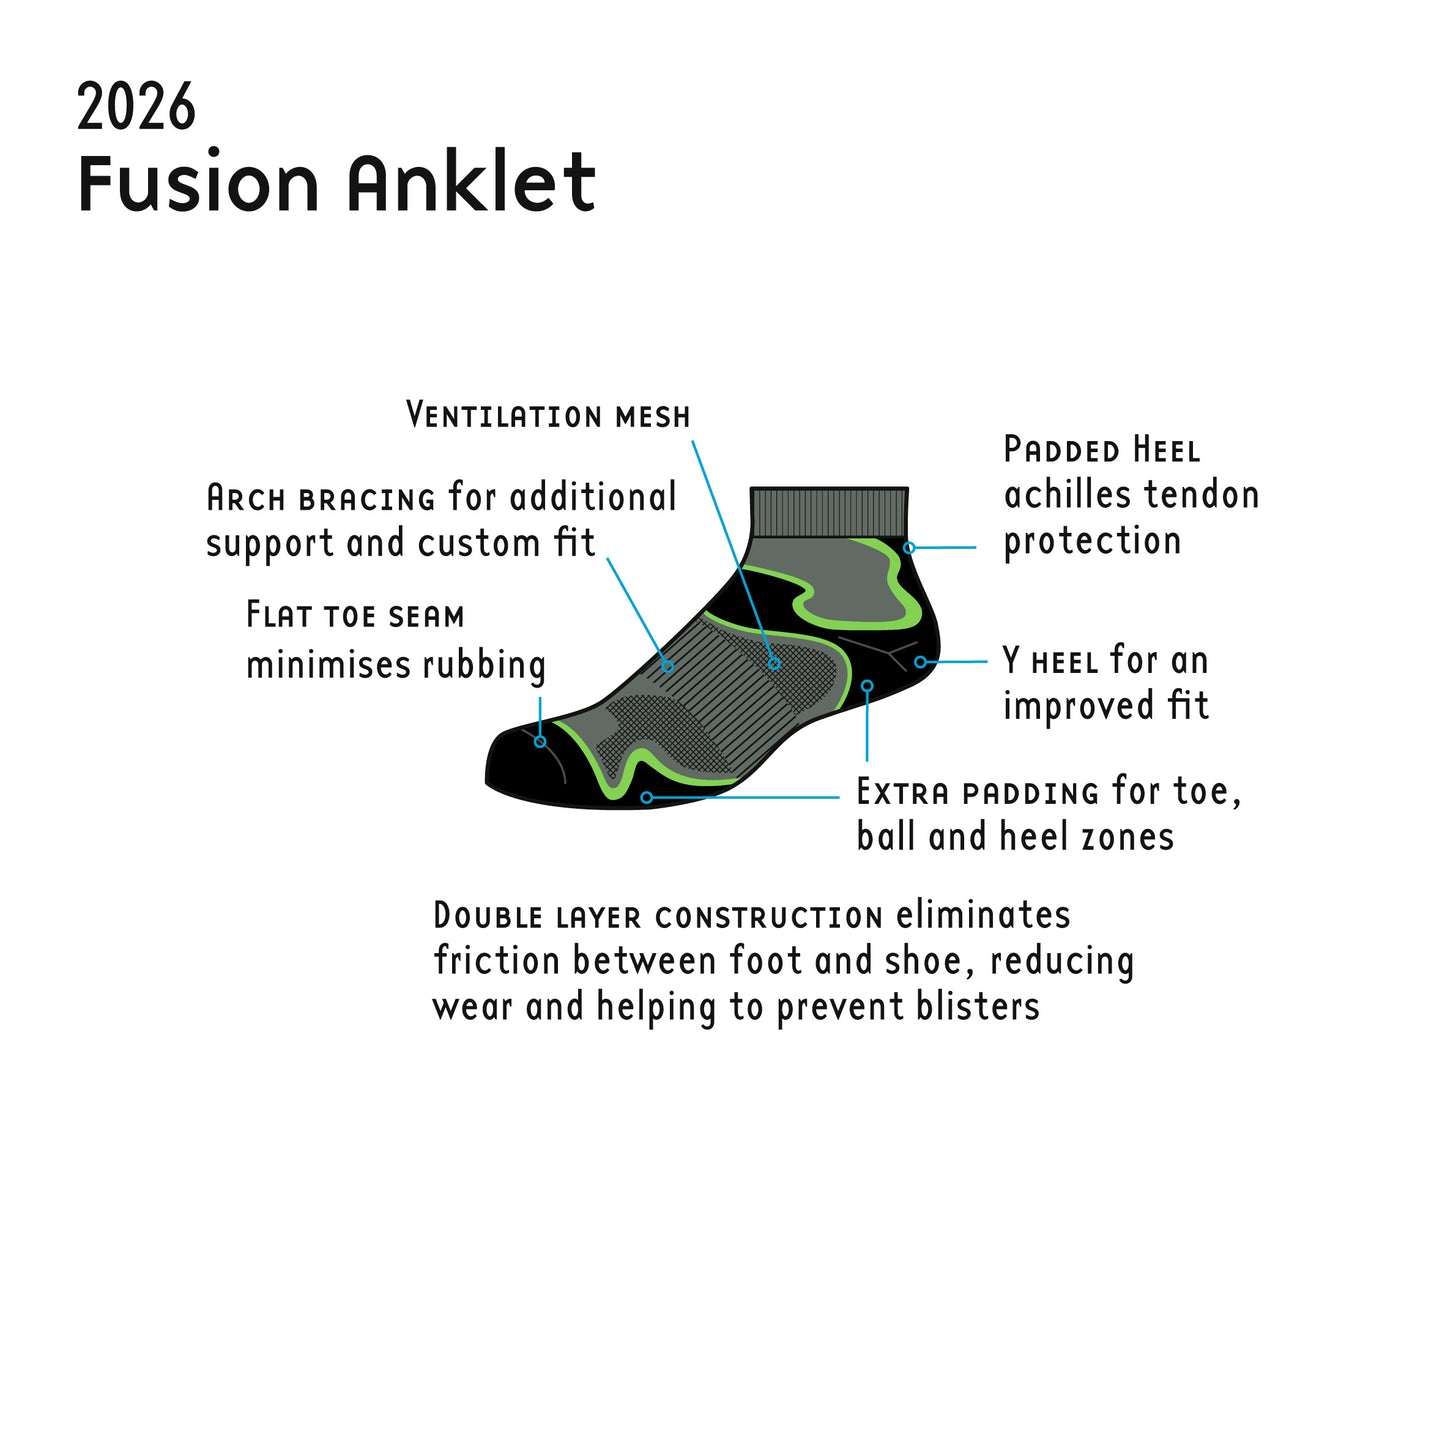 Women's fusion double layer anklet sock diagram